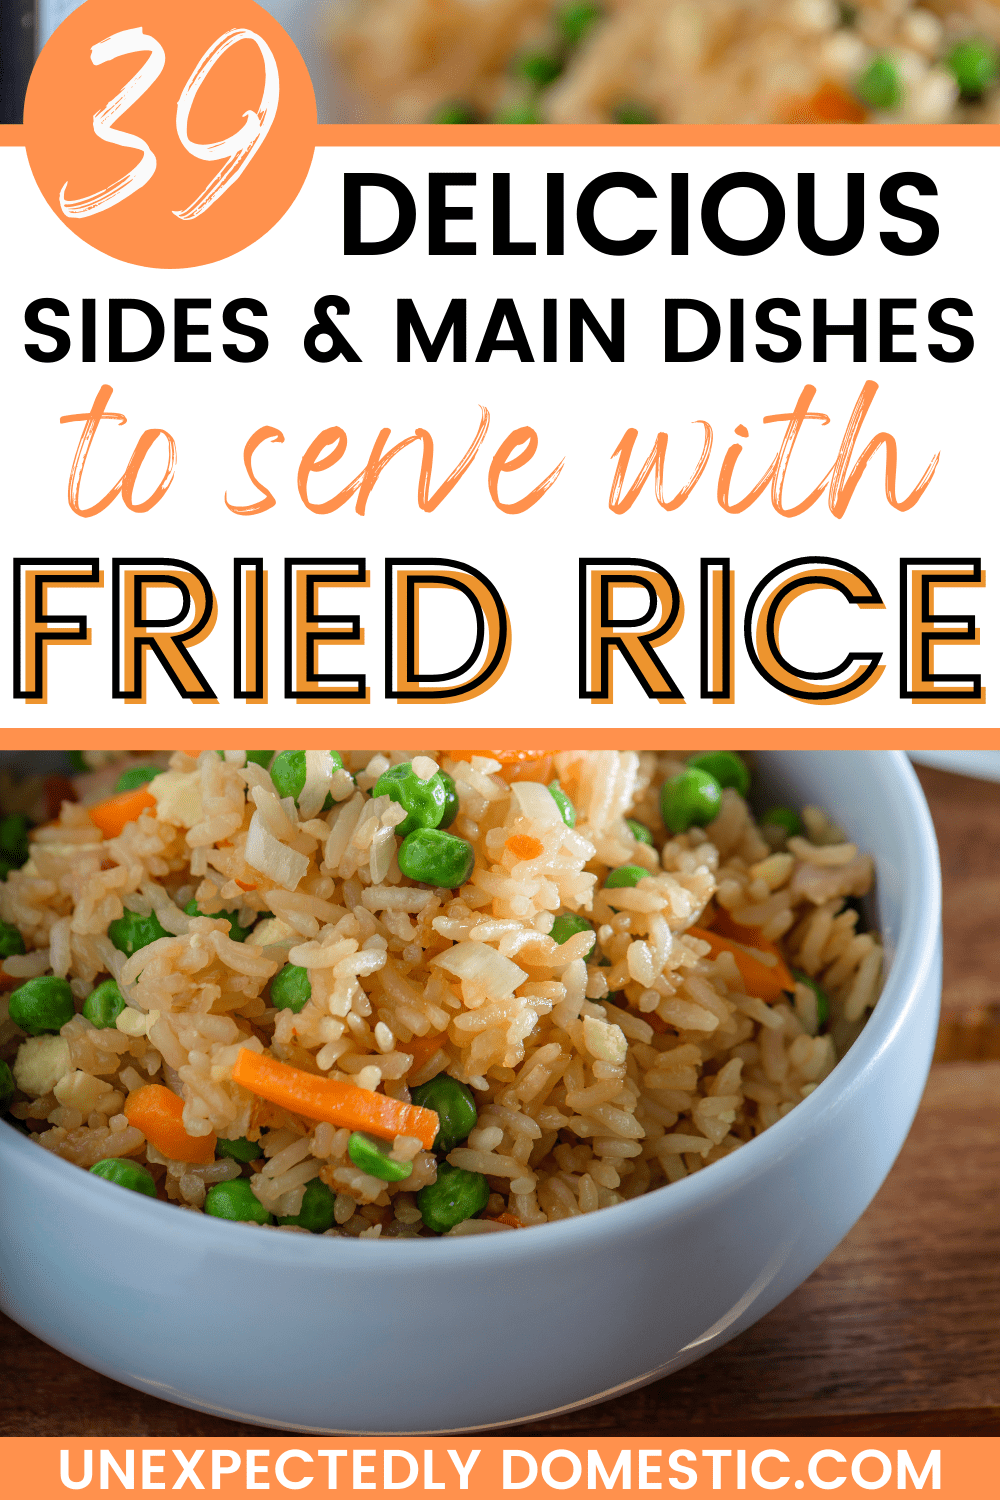 What to serve with fried rice! Here are the best side dishes to eat with fried rice for a fantastically delicious dinner.